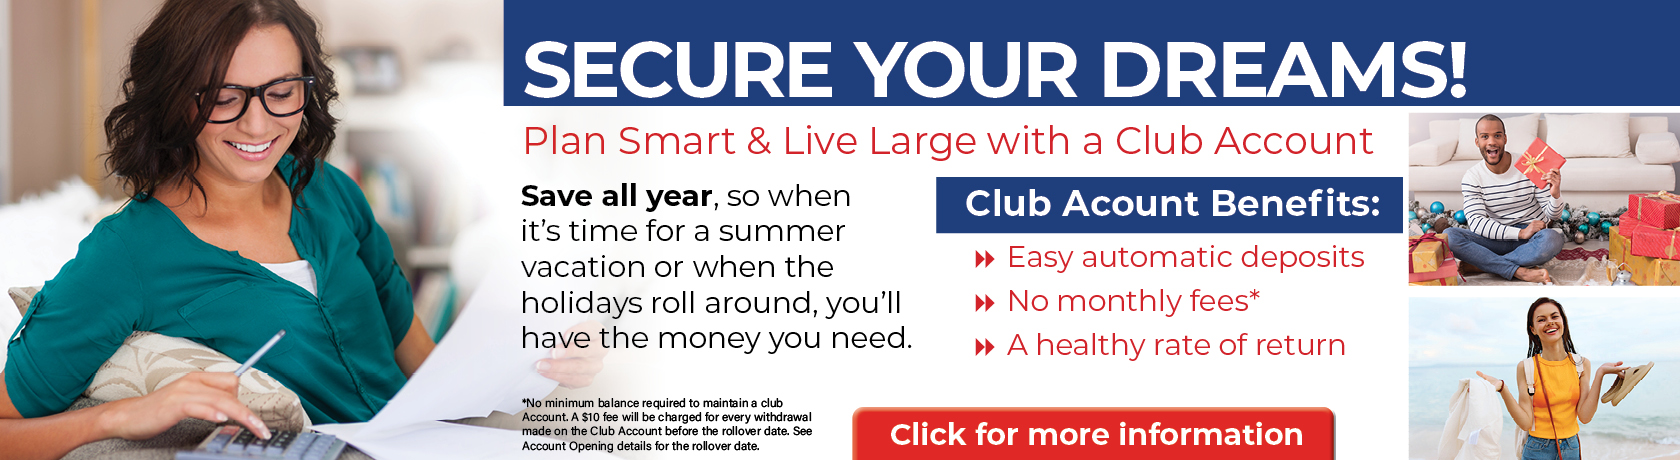 SECURE YOUR DREAMS!
Plan Smart & Live Large with a Club Account
Save all year, so when it's tome for a summer vacation or when the holidays roll around, you'll have the money you need.
Club Acct Benefits: Easy automatic deposit, no mothly fees*, a healthy rate of return
*No min balance required to maintain a club accot. a $10 fee will be charged for every withdrawal made on the club acct before the rollover date. see acco opening details for the rollover date.
CLICK FOR MORE INFORMATION.